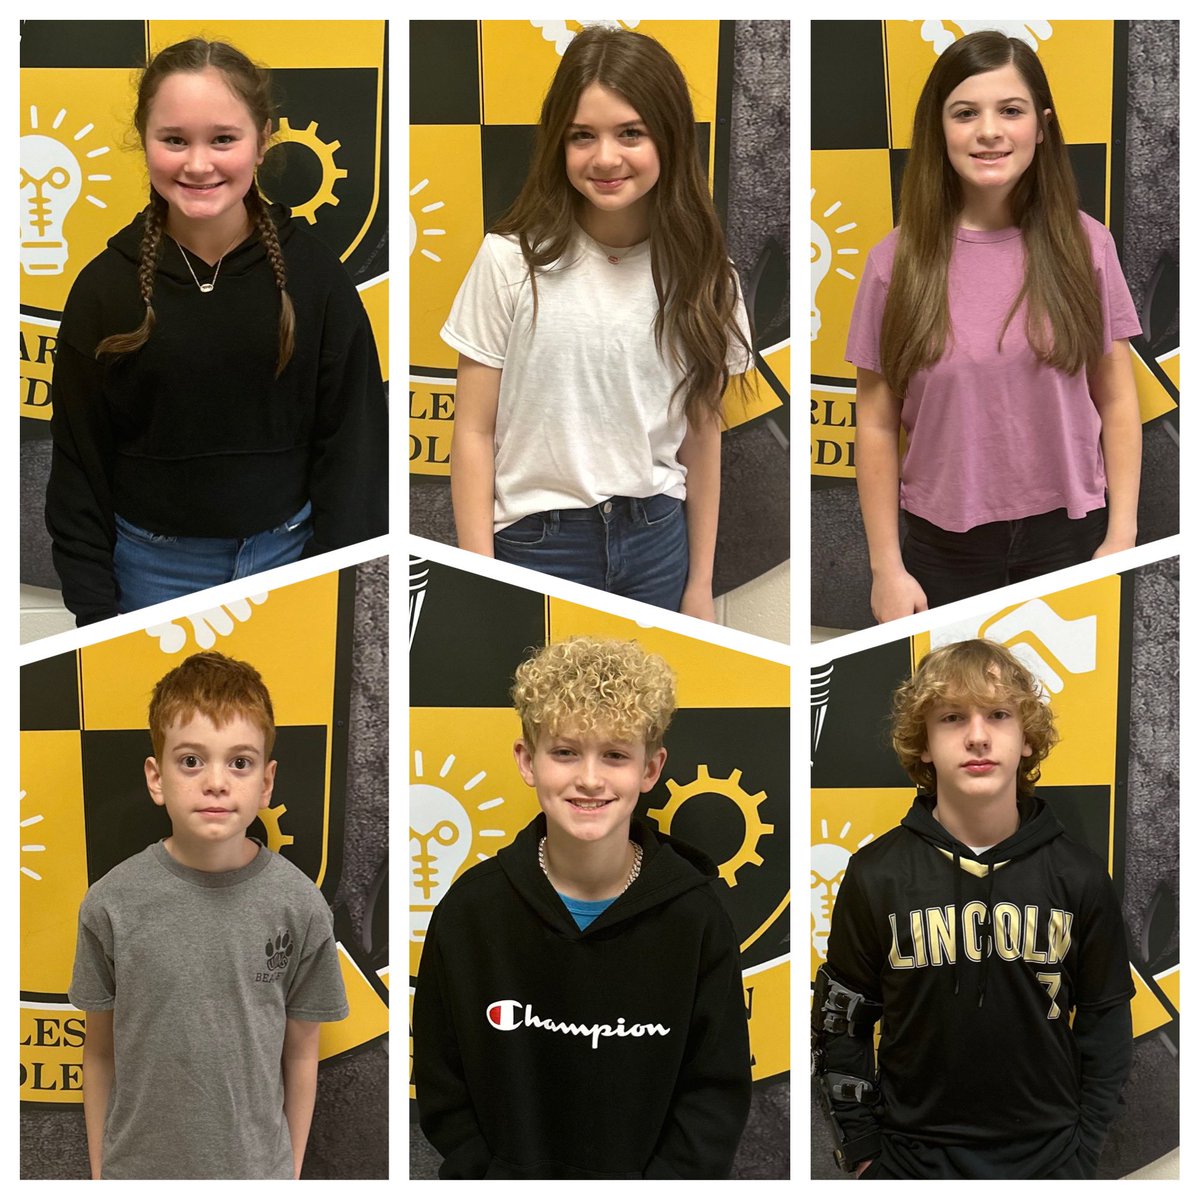 Congratulations to our Students of the Week!! #theDREWway